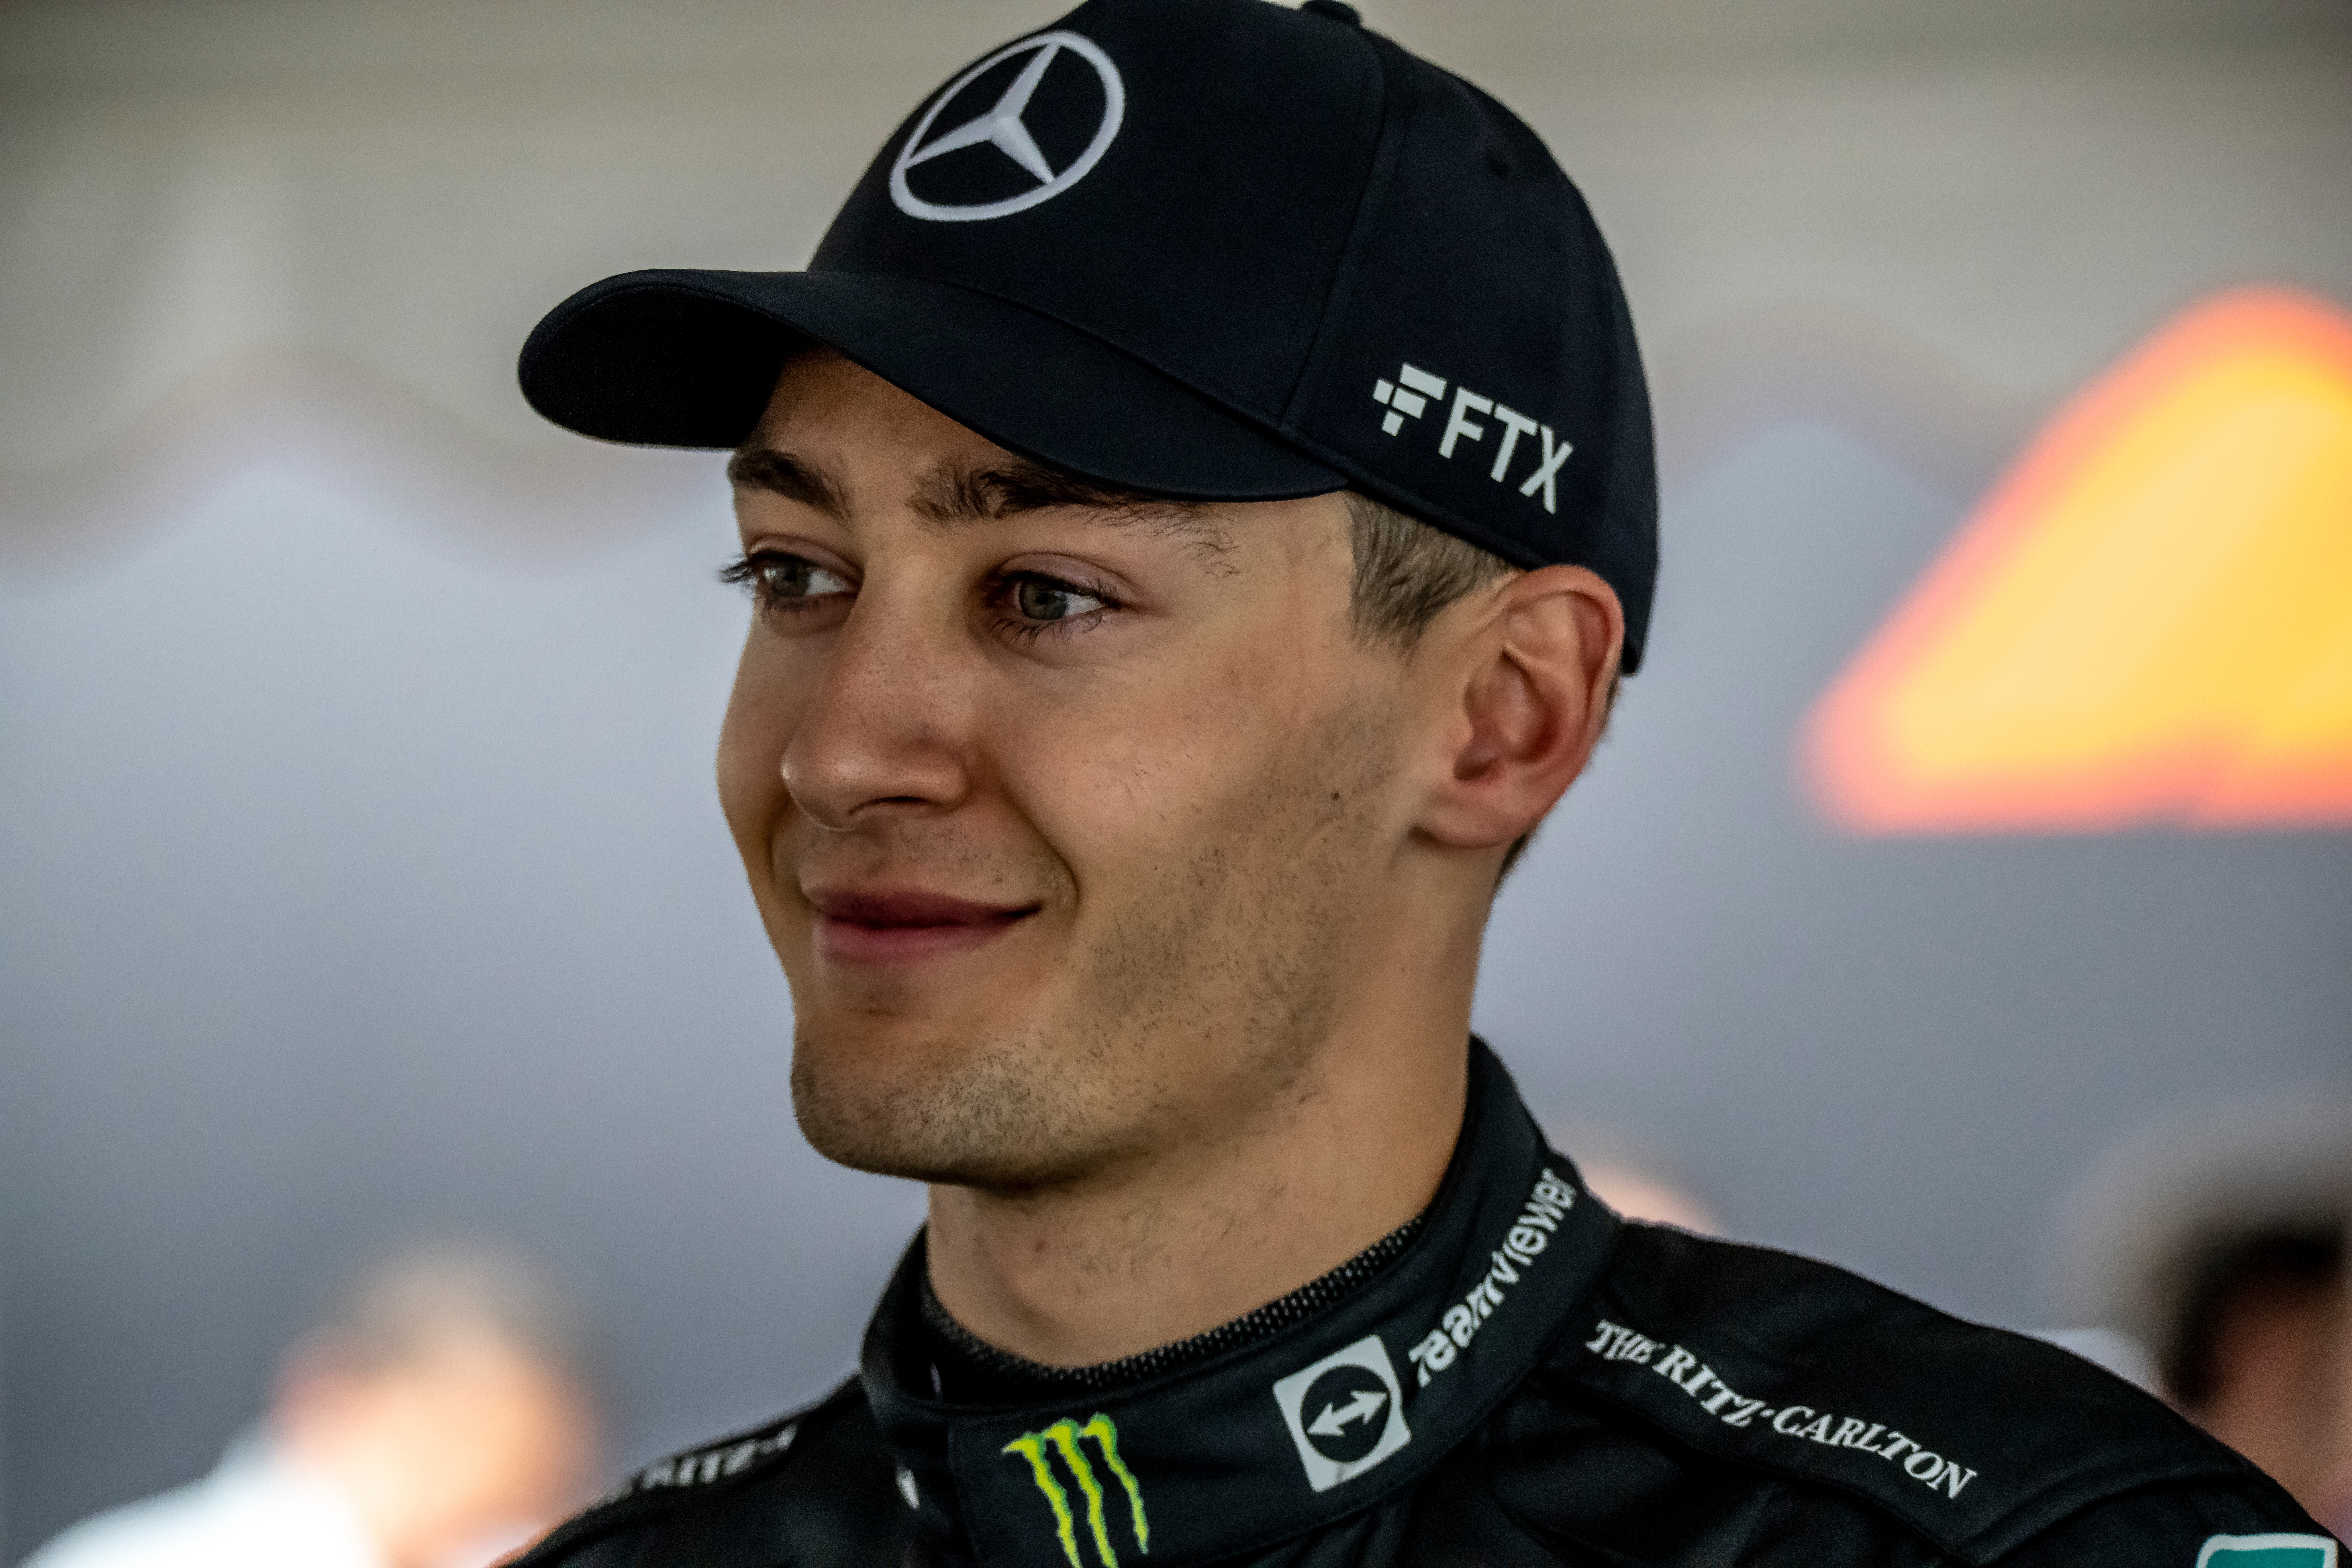 George Russell wins his first Formula One at the São Paulo F1 GP